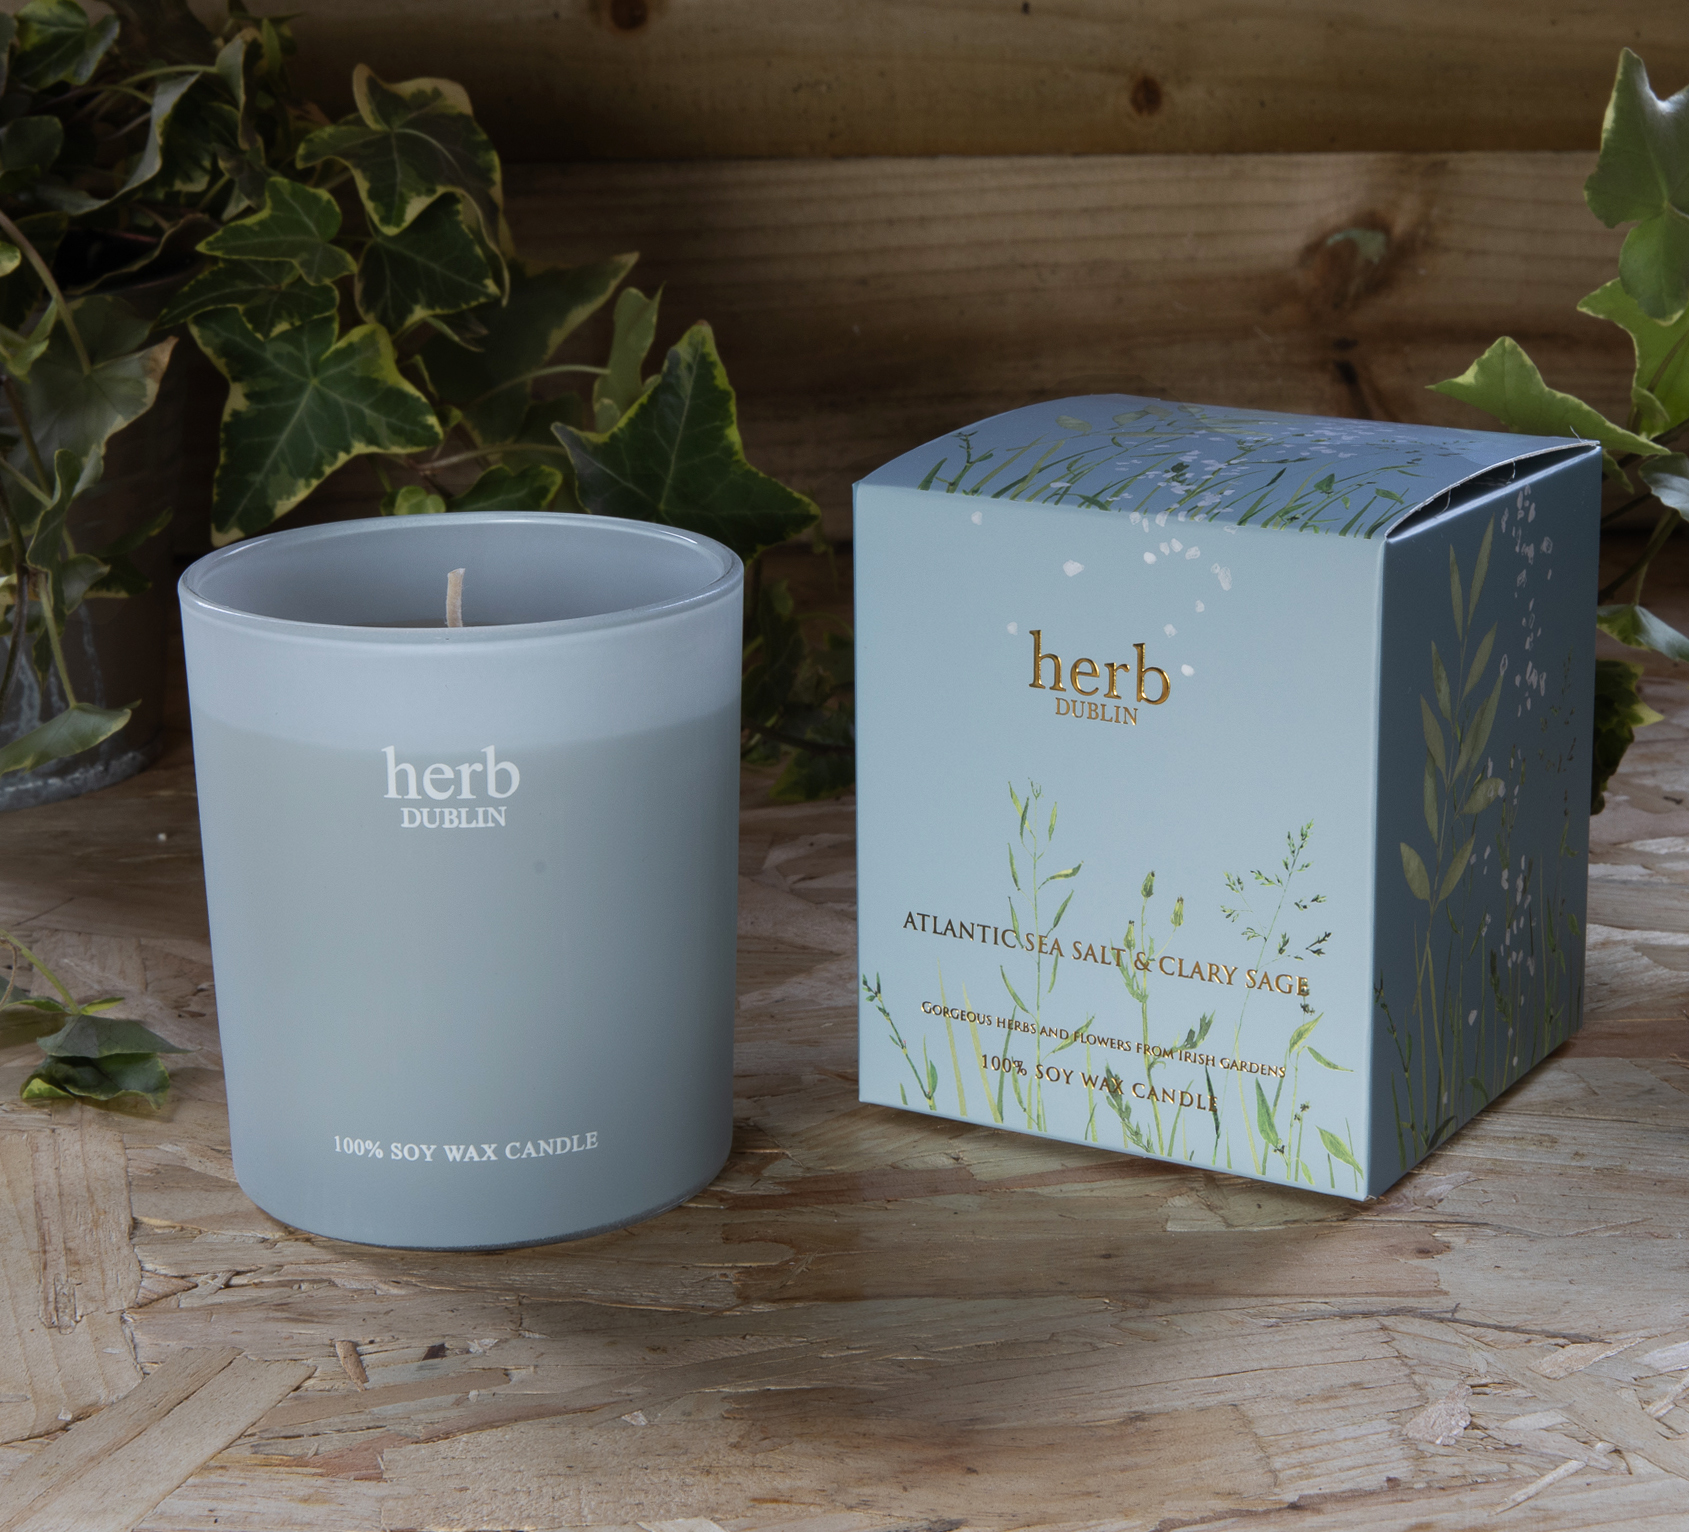 Herb Atlantic Sea Salt Boxed Candle product image